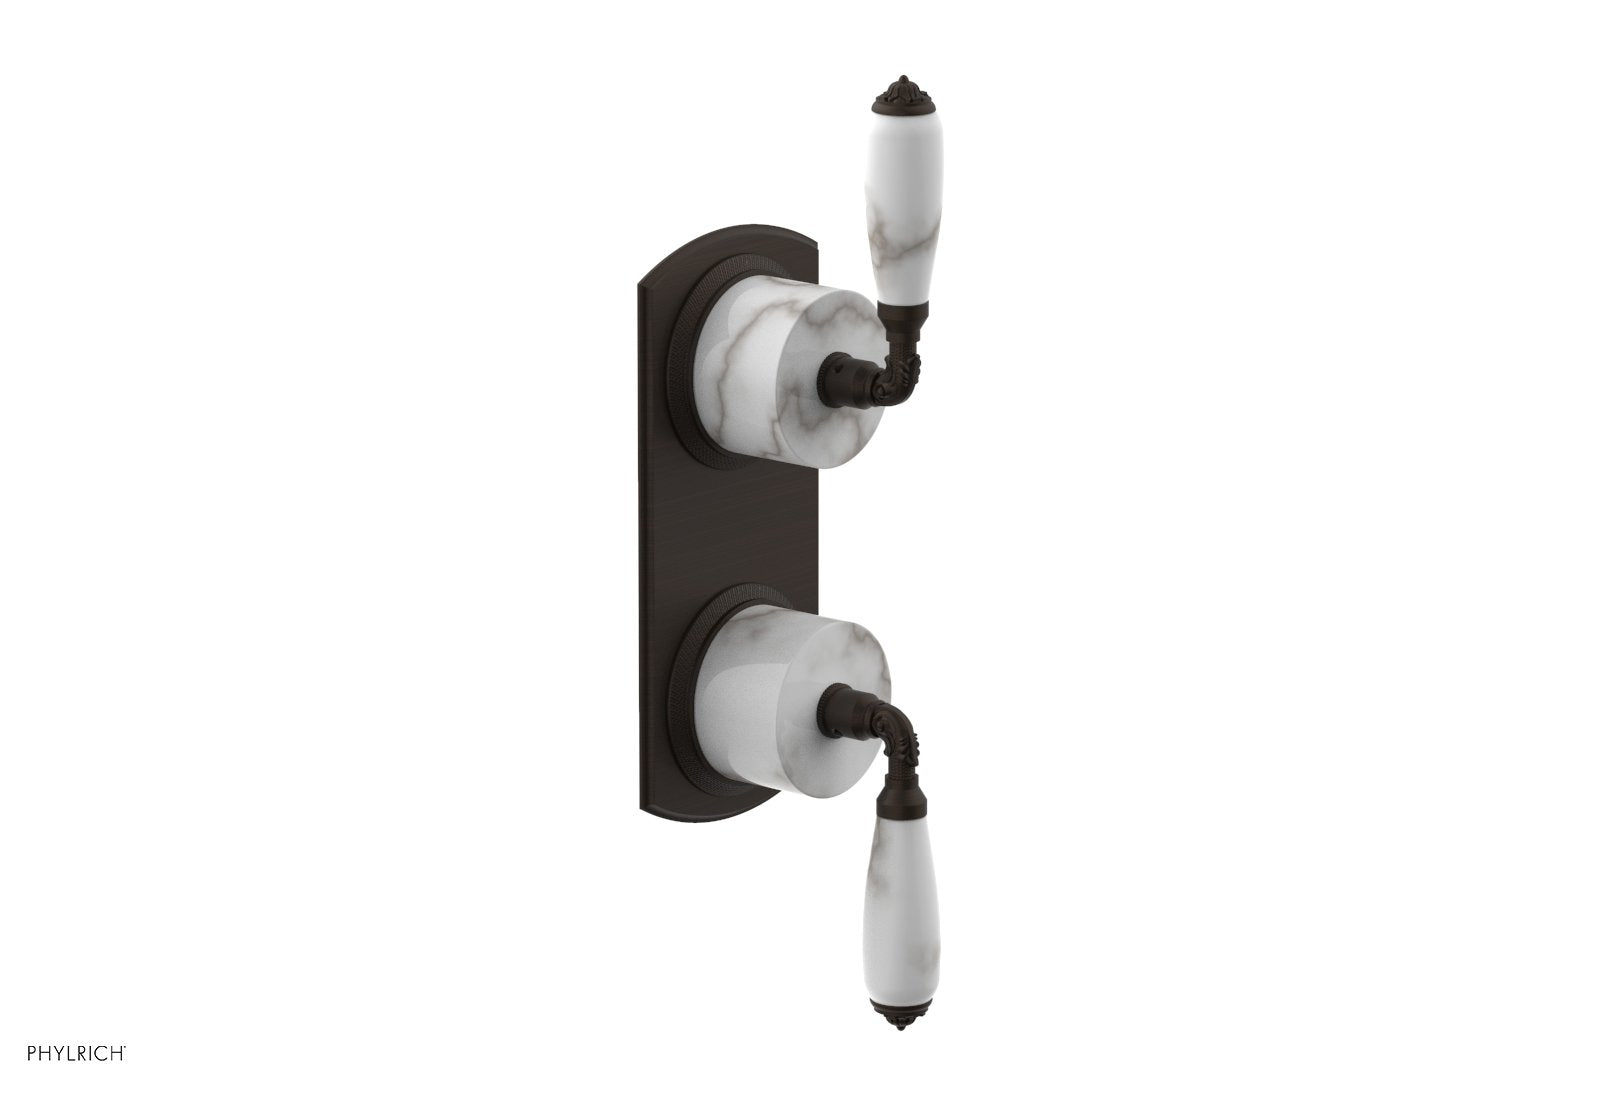 Phylrich VALENCIA Thermostatic Valve with Volume Control or Diverter, White Marble Lever Handles